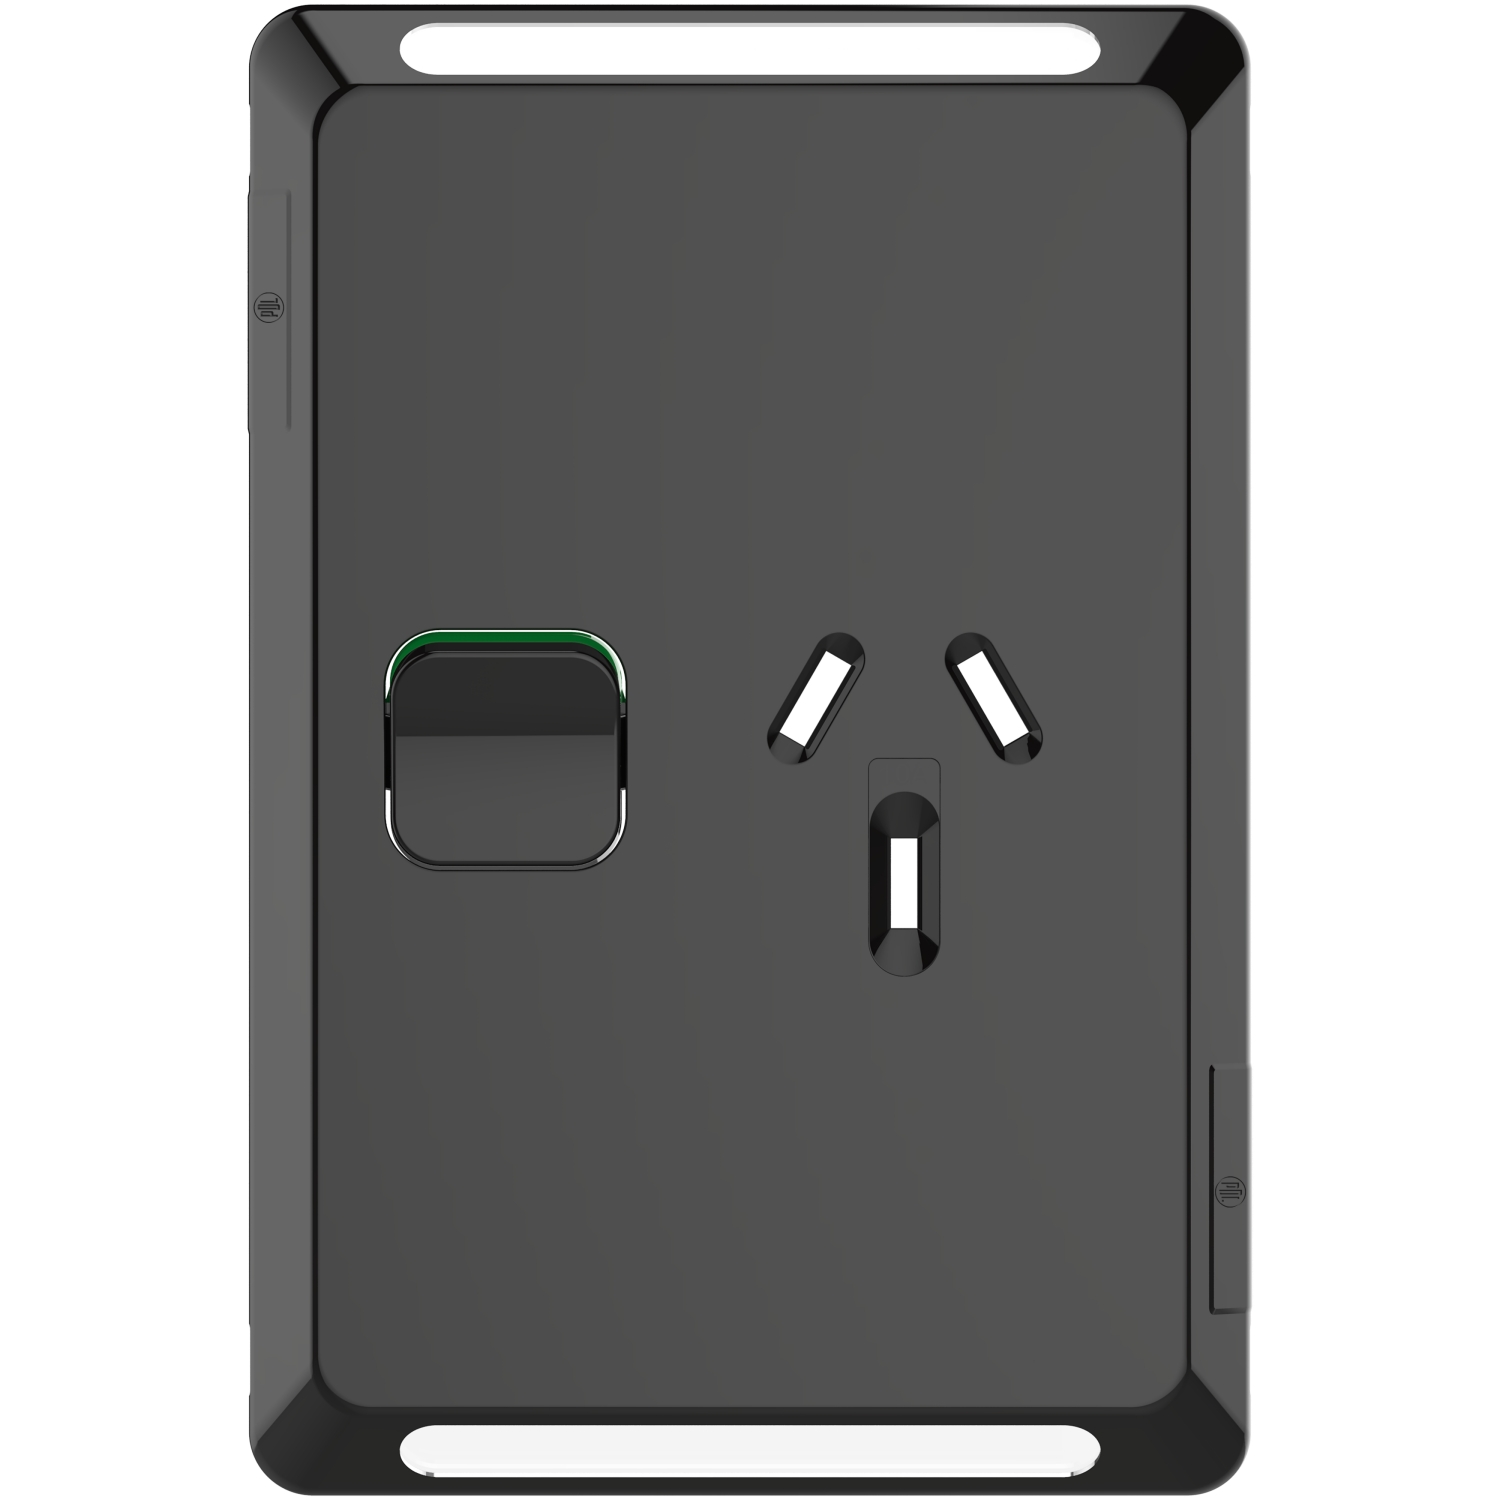 PDL Pro Series - Cover Plate Switched Socket 10A Vertical - Black